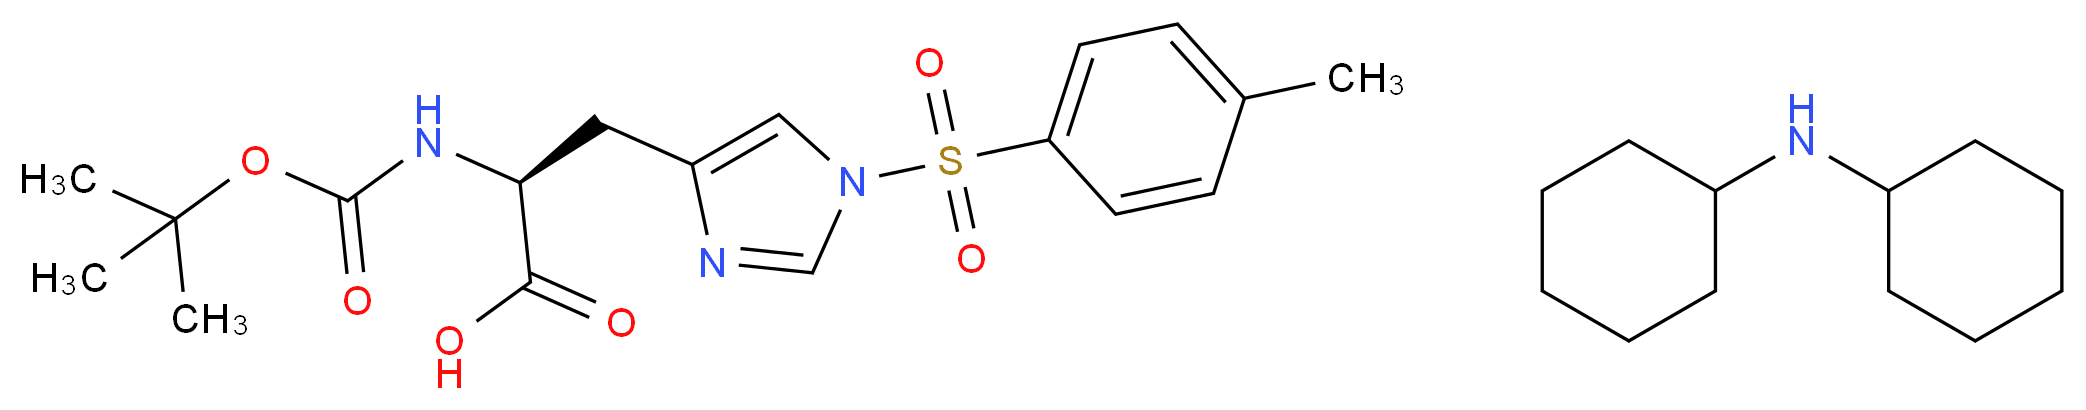 Dicyclohexylamine (S)-2-((tert-butoxycarbonyl)amino)-3-(1-tosyl-1H-imidazol-4-yl)propanoate_Molecular_structure_CAS_65057-34-3)